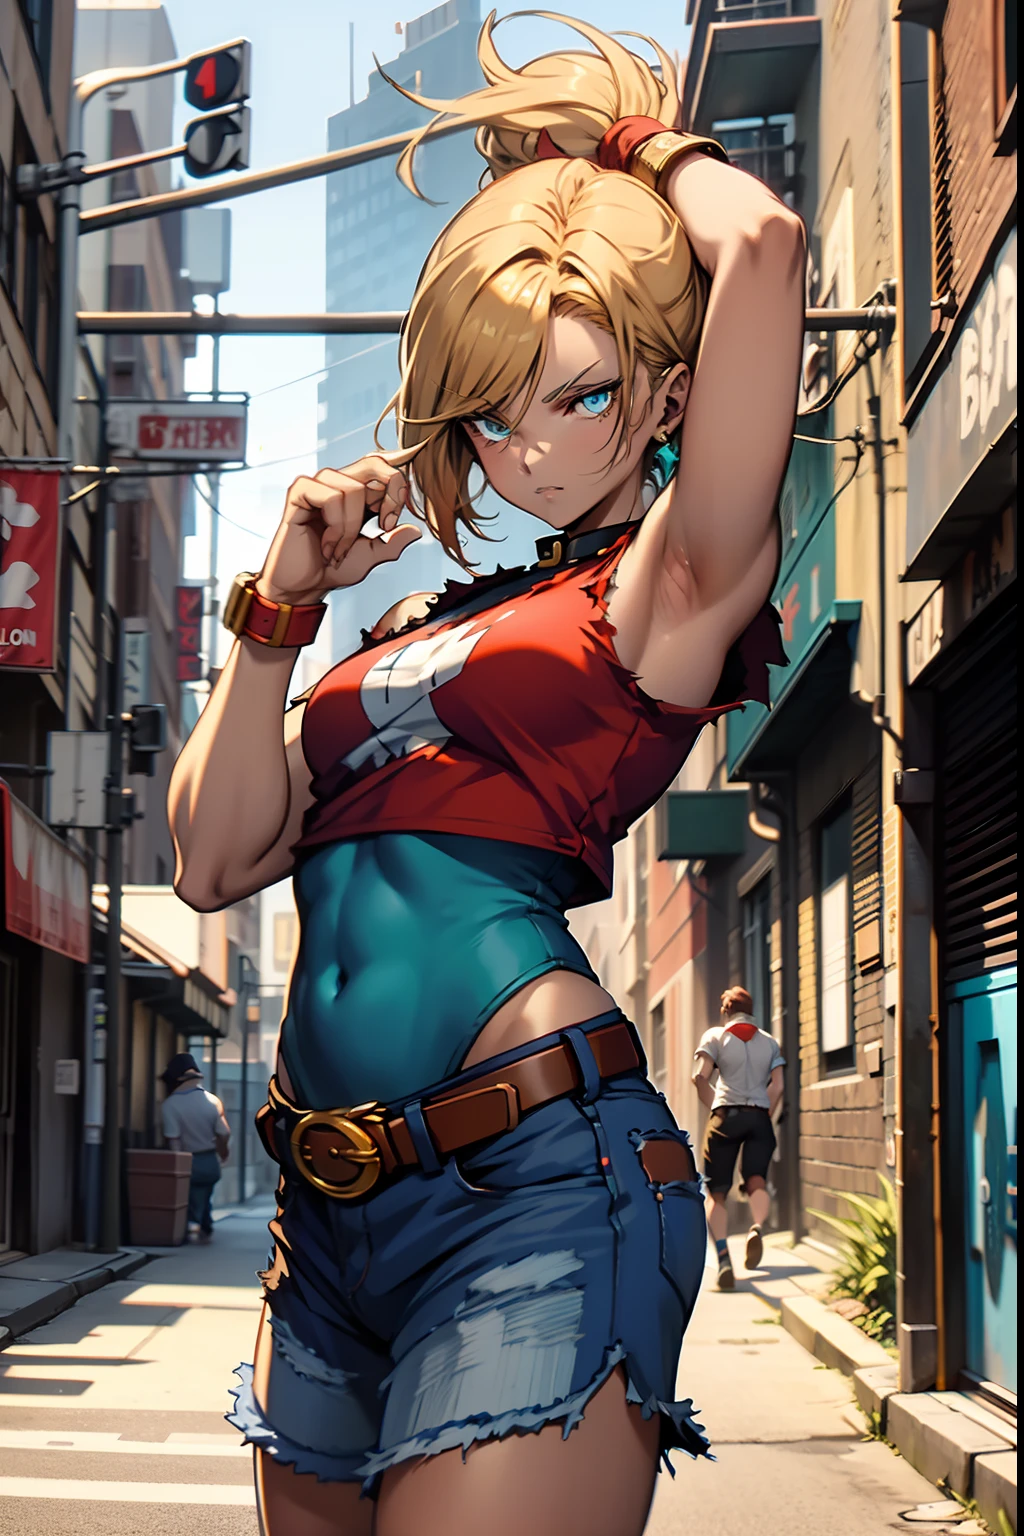 Golden Shorthair, turquoise Eyes, Red sleek polar sleeveless cropped tee, Ripped micro denim puck, Brown leather belt, Kicking posture, New York back-alley background, The King of Fighters' Blue Marie Reference;